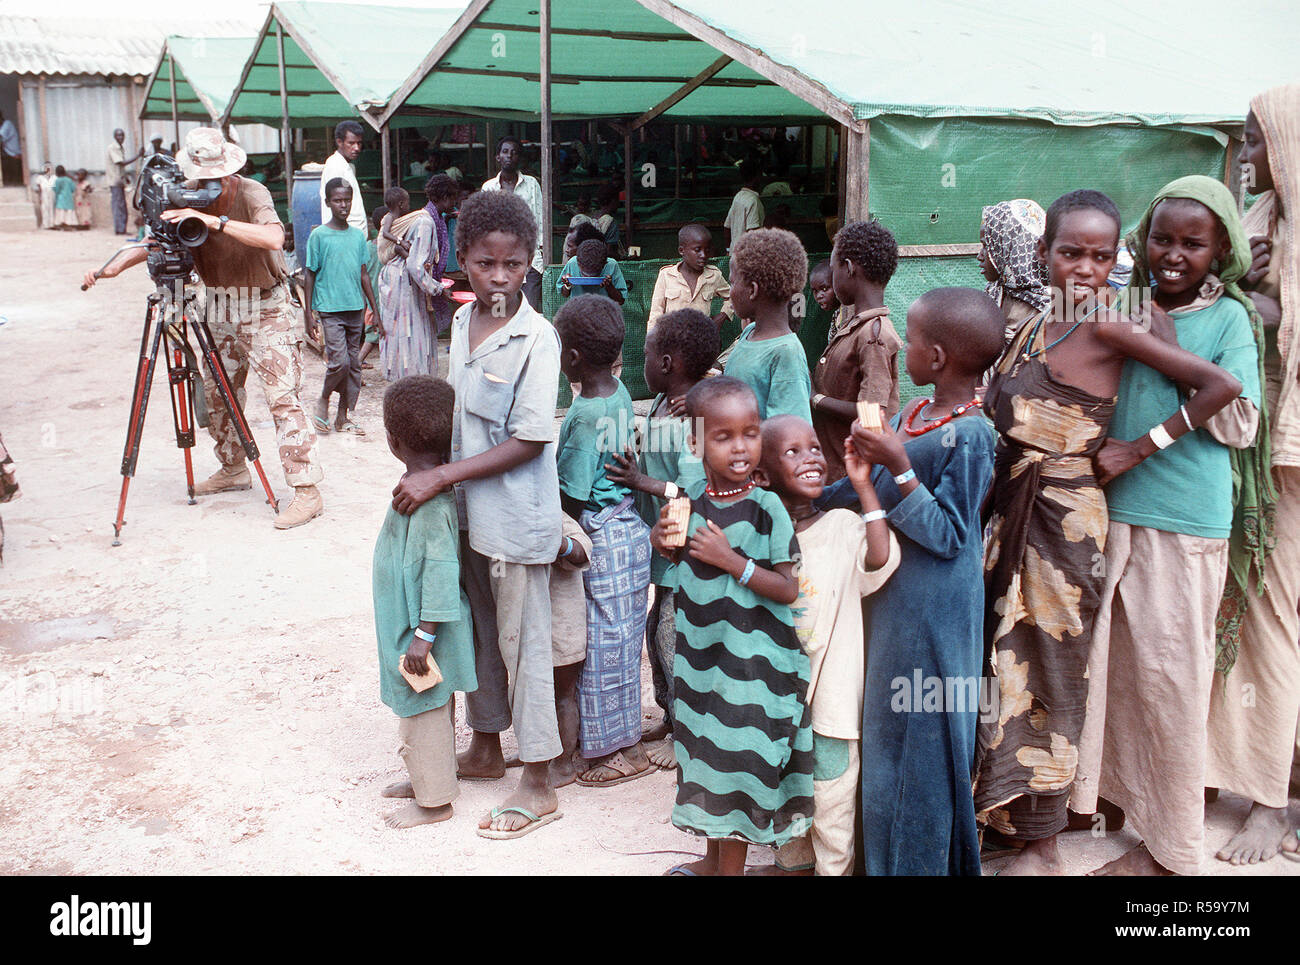 1993 - Chief Photographer's Mate Robert Sasek videotapes Somalis lining up for a  meal at the Concern Feeding Center during the multinational relief effort OPERATION RESTORE HOPE.  The center is operated by the Irish relief organization Concern. Stock Photo